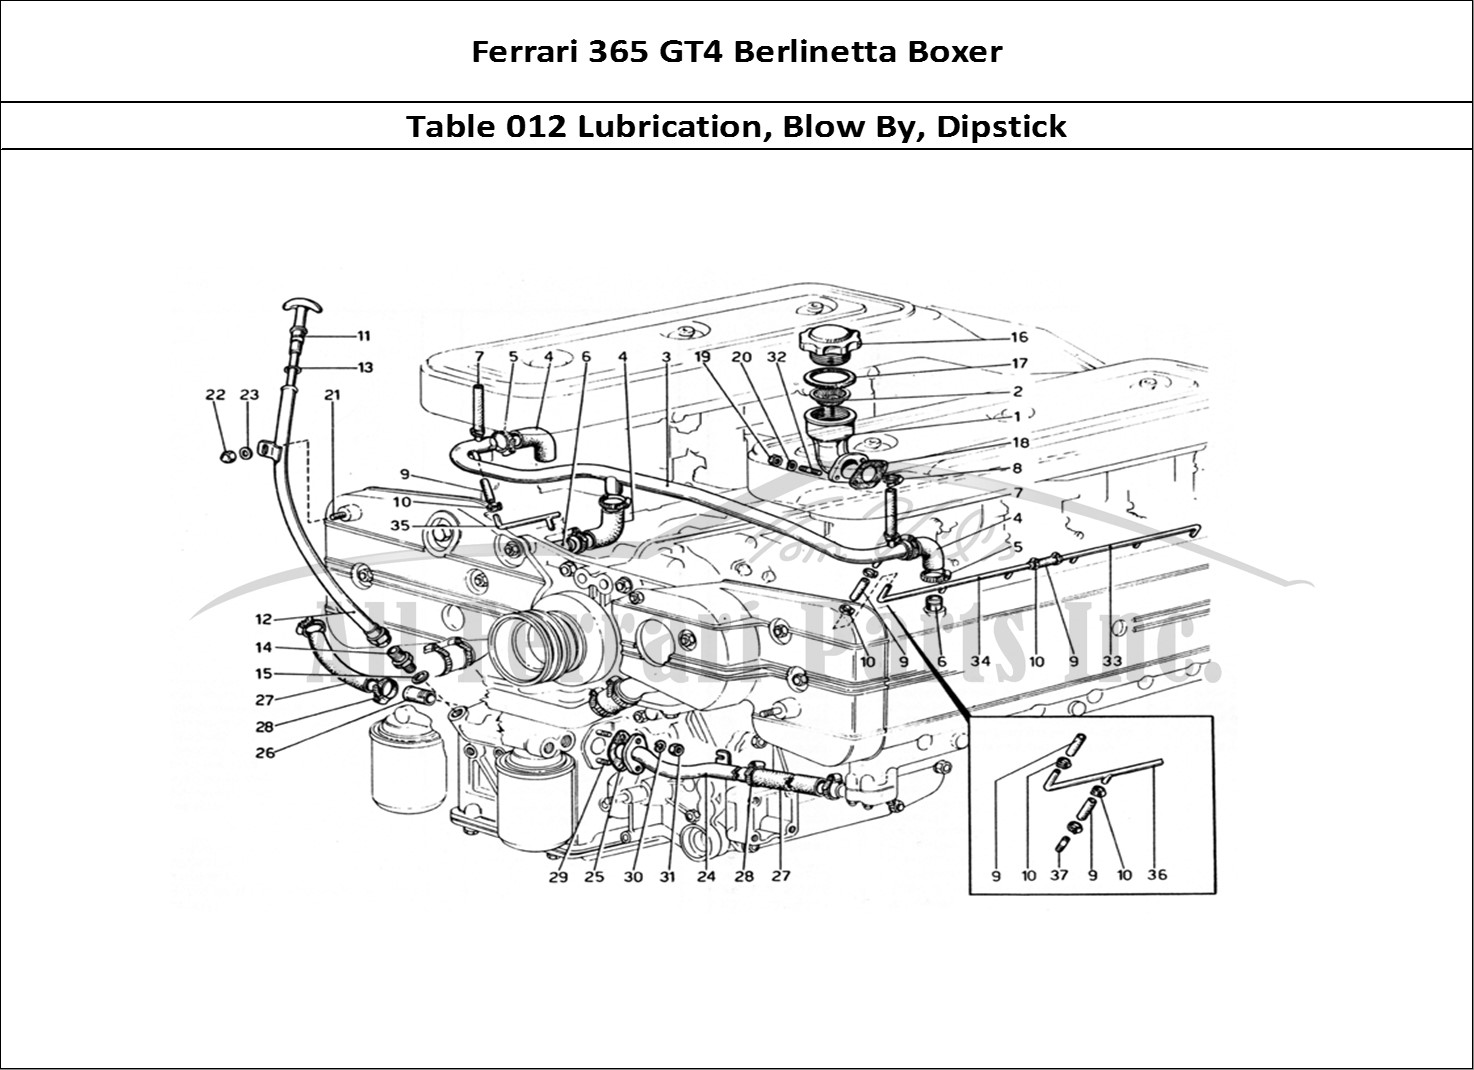 Ferrari Parts Ferrari 365 GT4 Berlinetta Boxer Page 012 Lubrication - Blow-By and